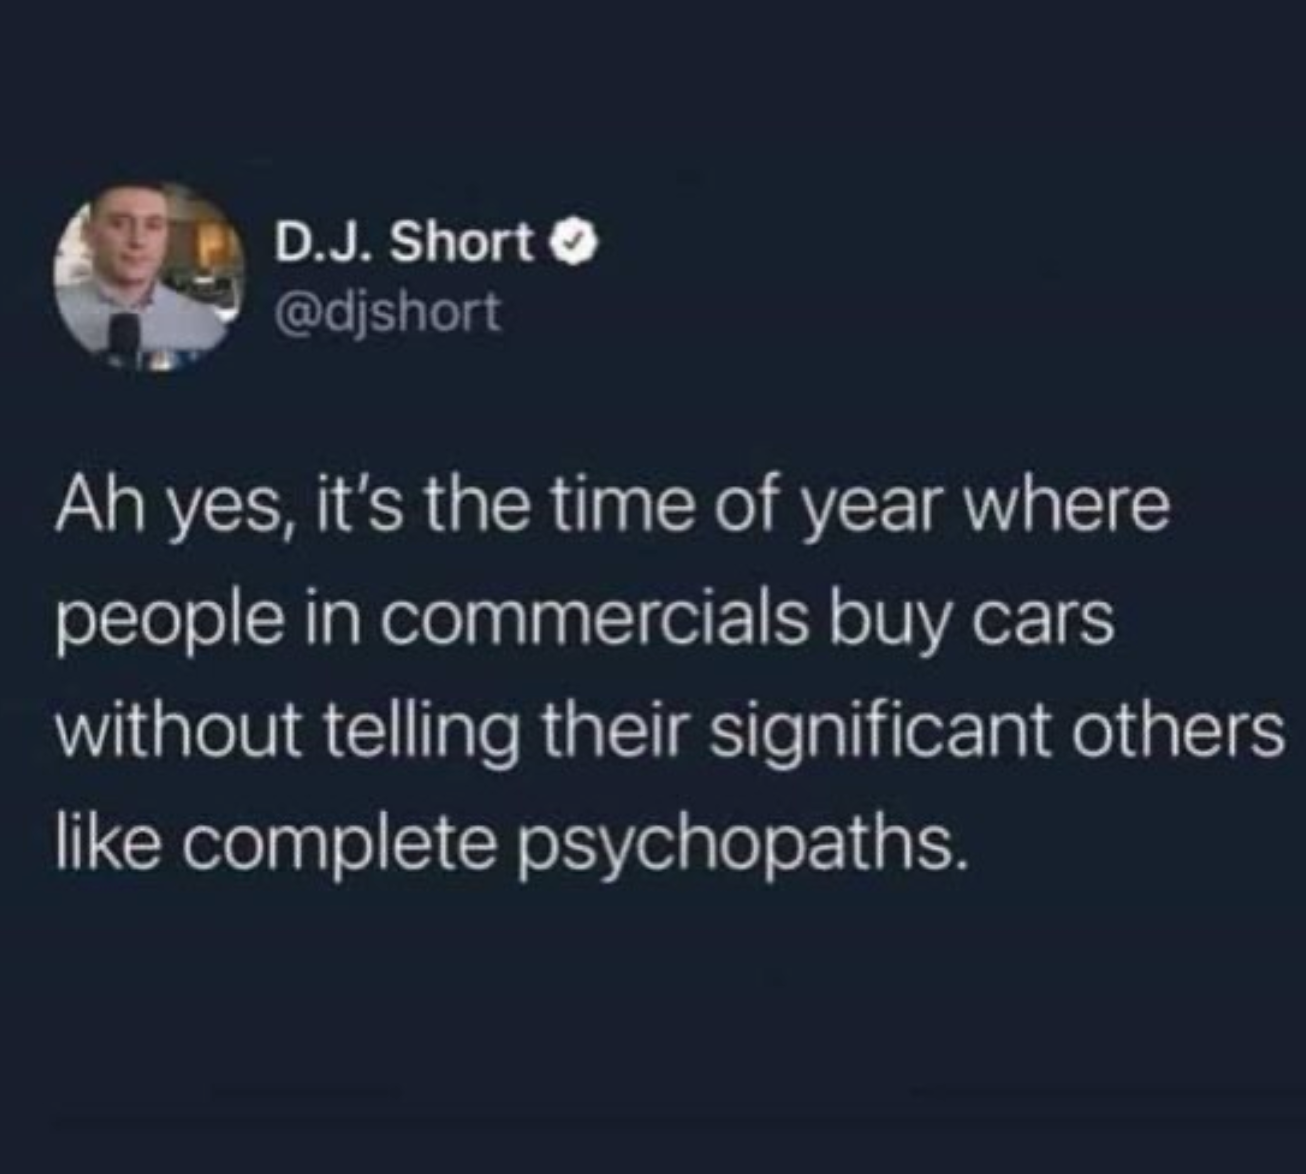 monday morning randomness - smoking meats or ww2 - D.J. Short Ah yes, it's the time of year where people in commercials buy cars without telling their significant others complete psychopaths.